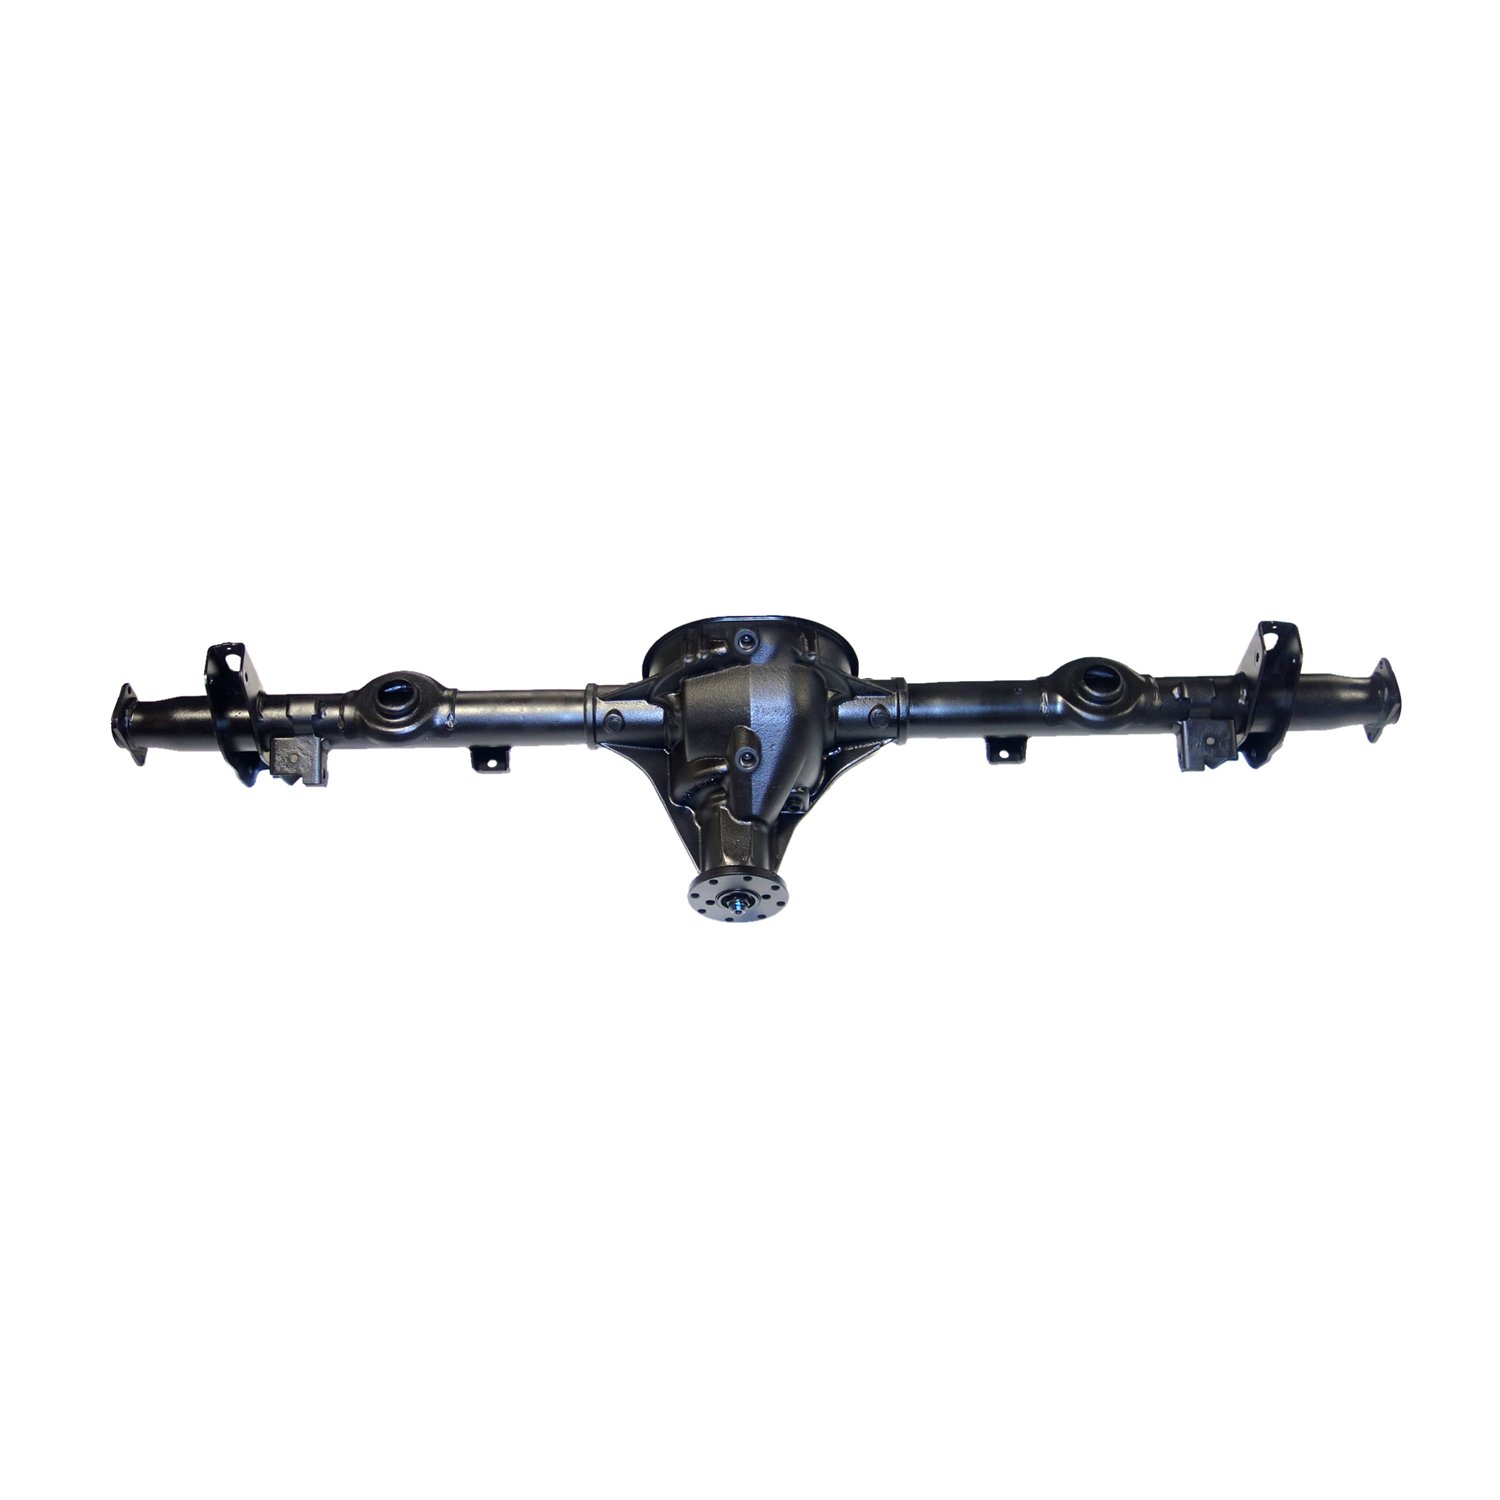 Remanufactured Complete Axle Assembly for 8.8" 03-11 Crown Vic 3.27, ABS, Posi LSD